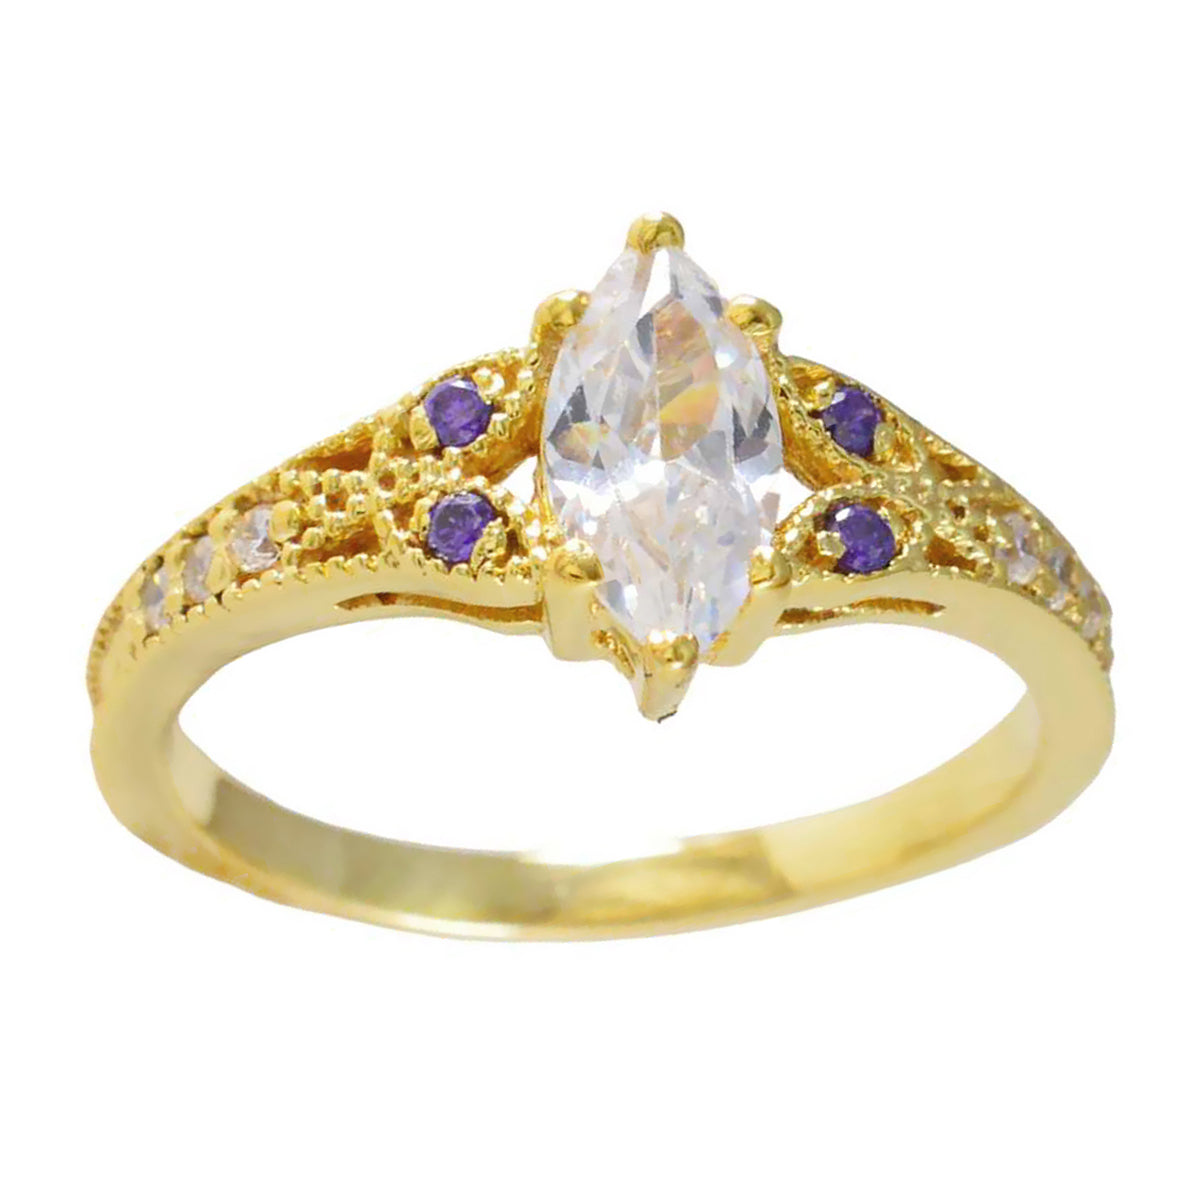 Riyo Antique Silver Ring With Yellow Gold Plating Amethyst Stone Marquise Shape Prong Setting Fashion Jewelry Birthday Ring